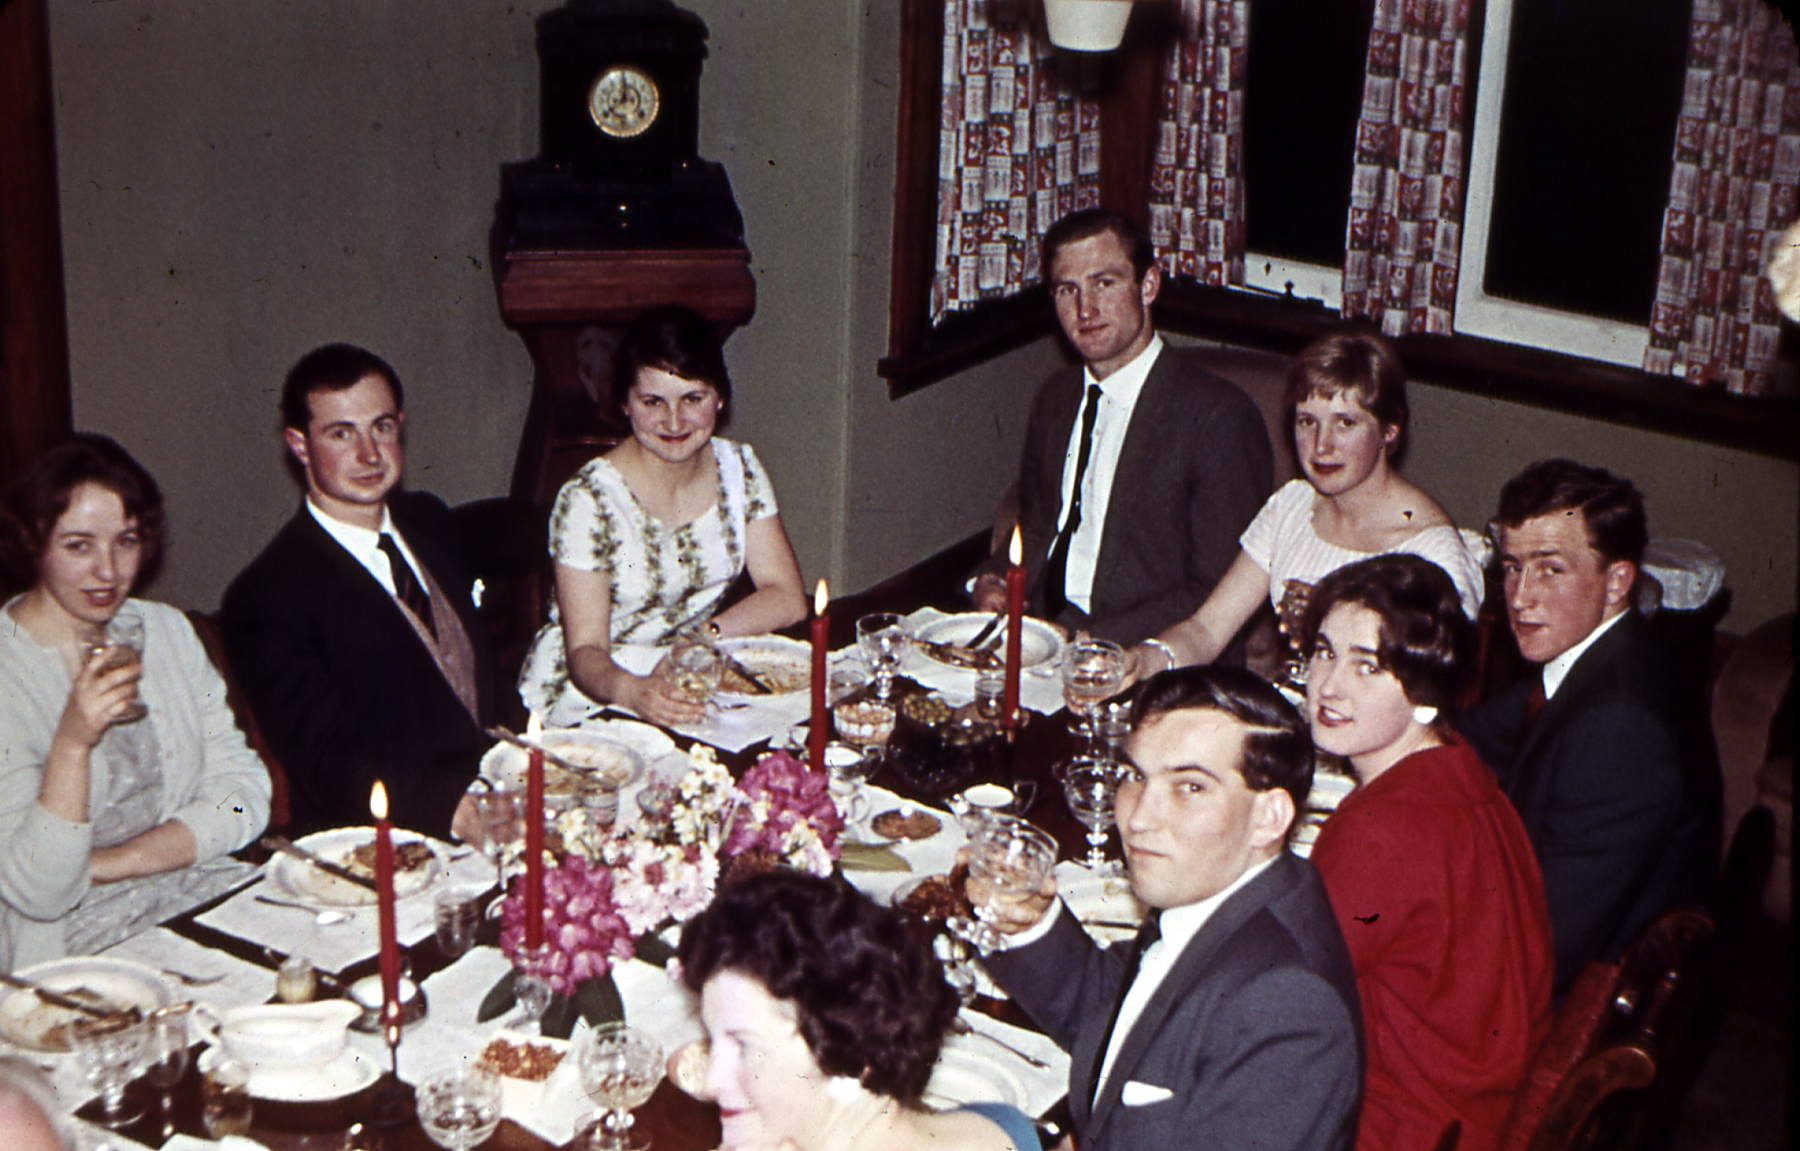 Dinner party at Toad Hall. [eLeft -right] Guest, Fred Strange, guest, John Allan, guest, Lachie Watson, guest, George Salmond. Jim Scott Collection.